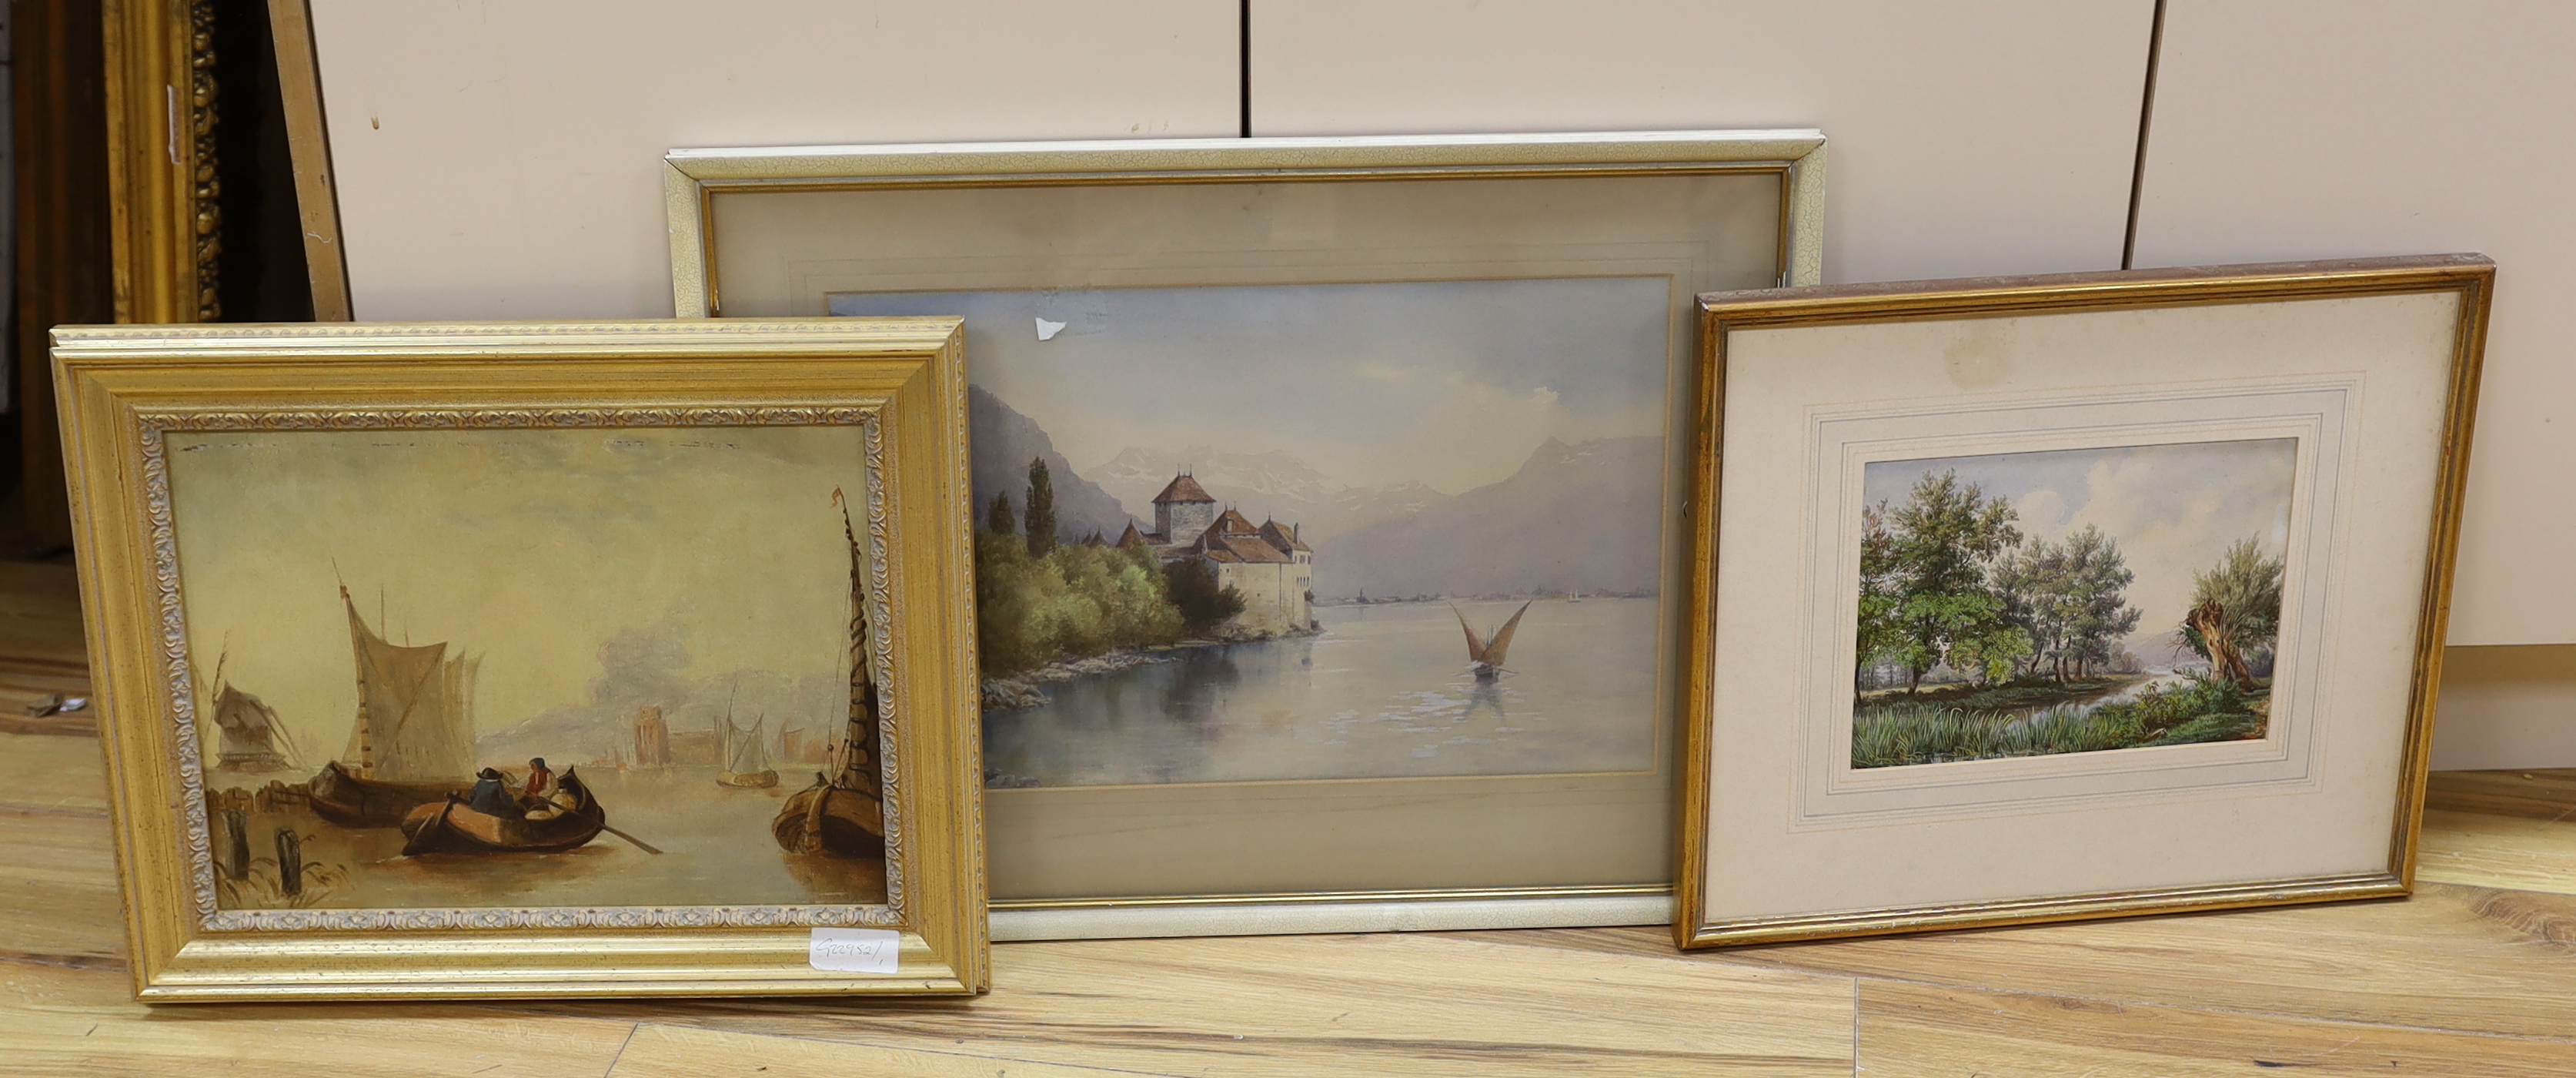 Fred C Dixon (b. 1902-1992), watercolour, Chateau Chillon, signed, together with another mid 19th century watercolour landscape and a Dutch oil on canvas, barges, largest 29 x 47cm                                        